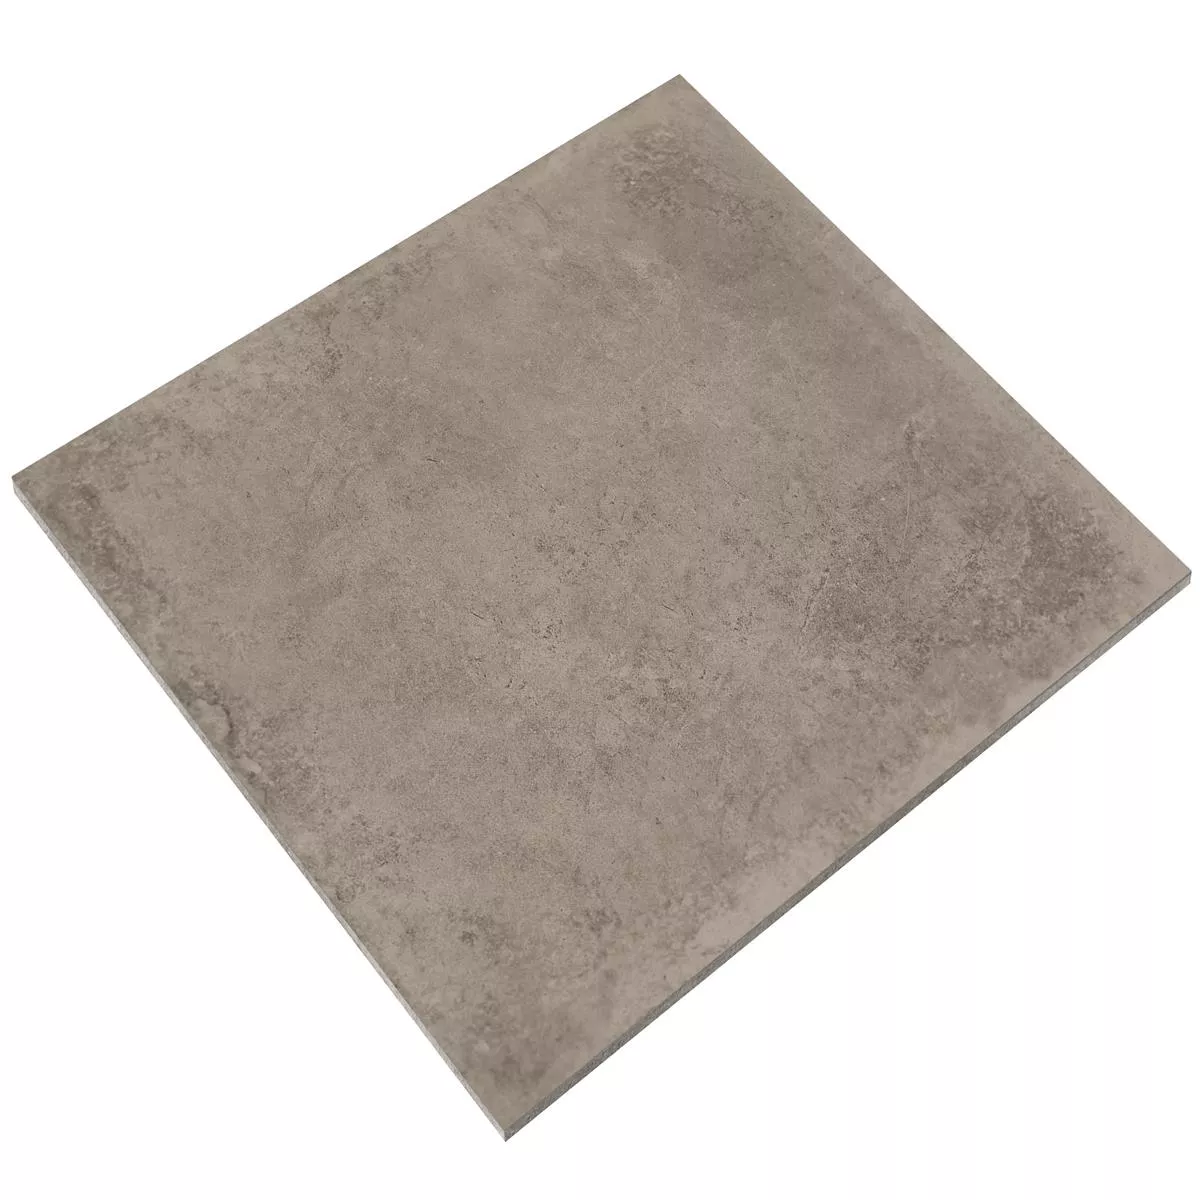 Floor Tiles Colossus Taupe 60x60cm